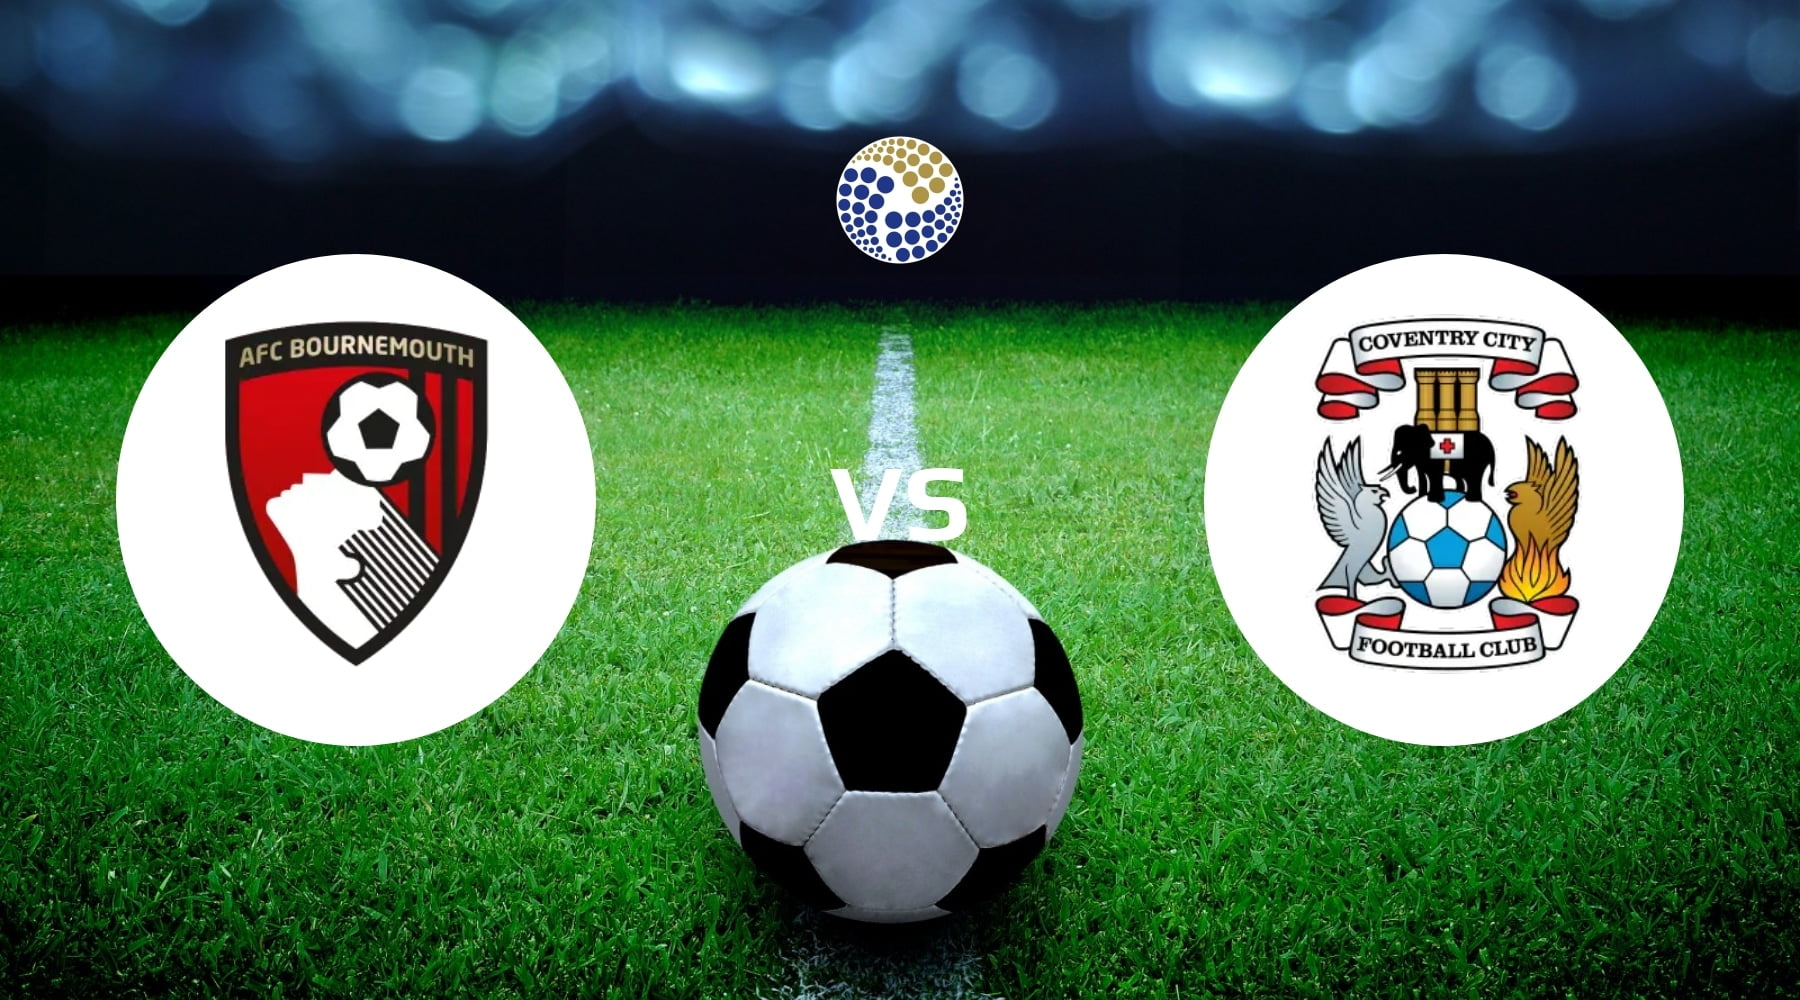 AFC Bournemouth vs Coventry City Betting Tips & Prediction